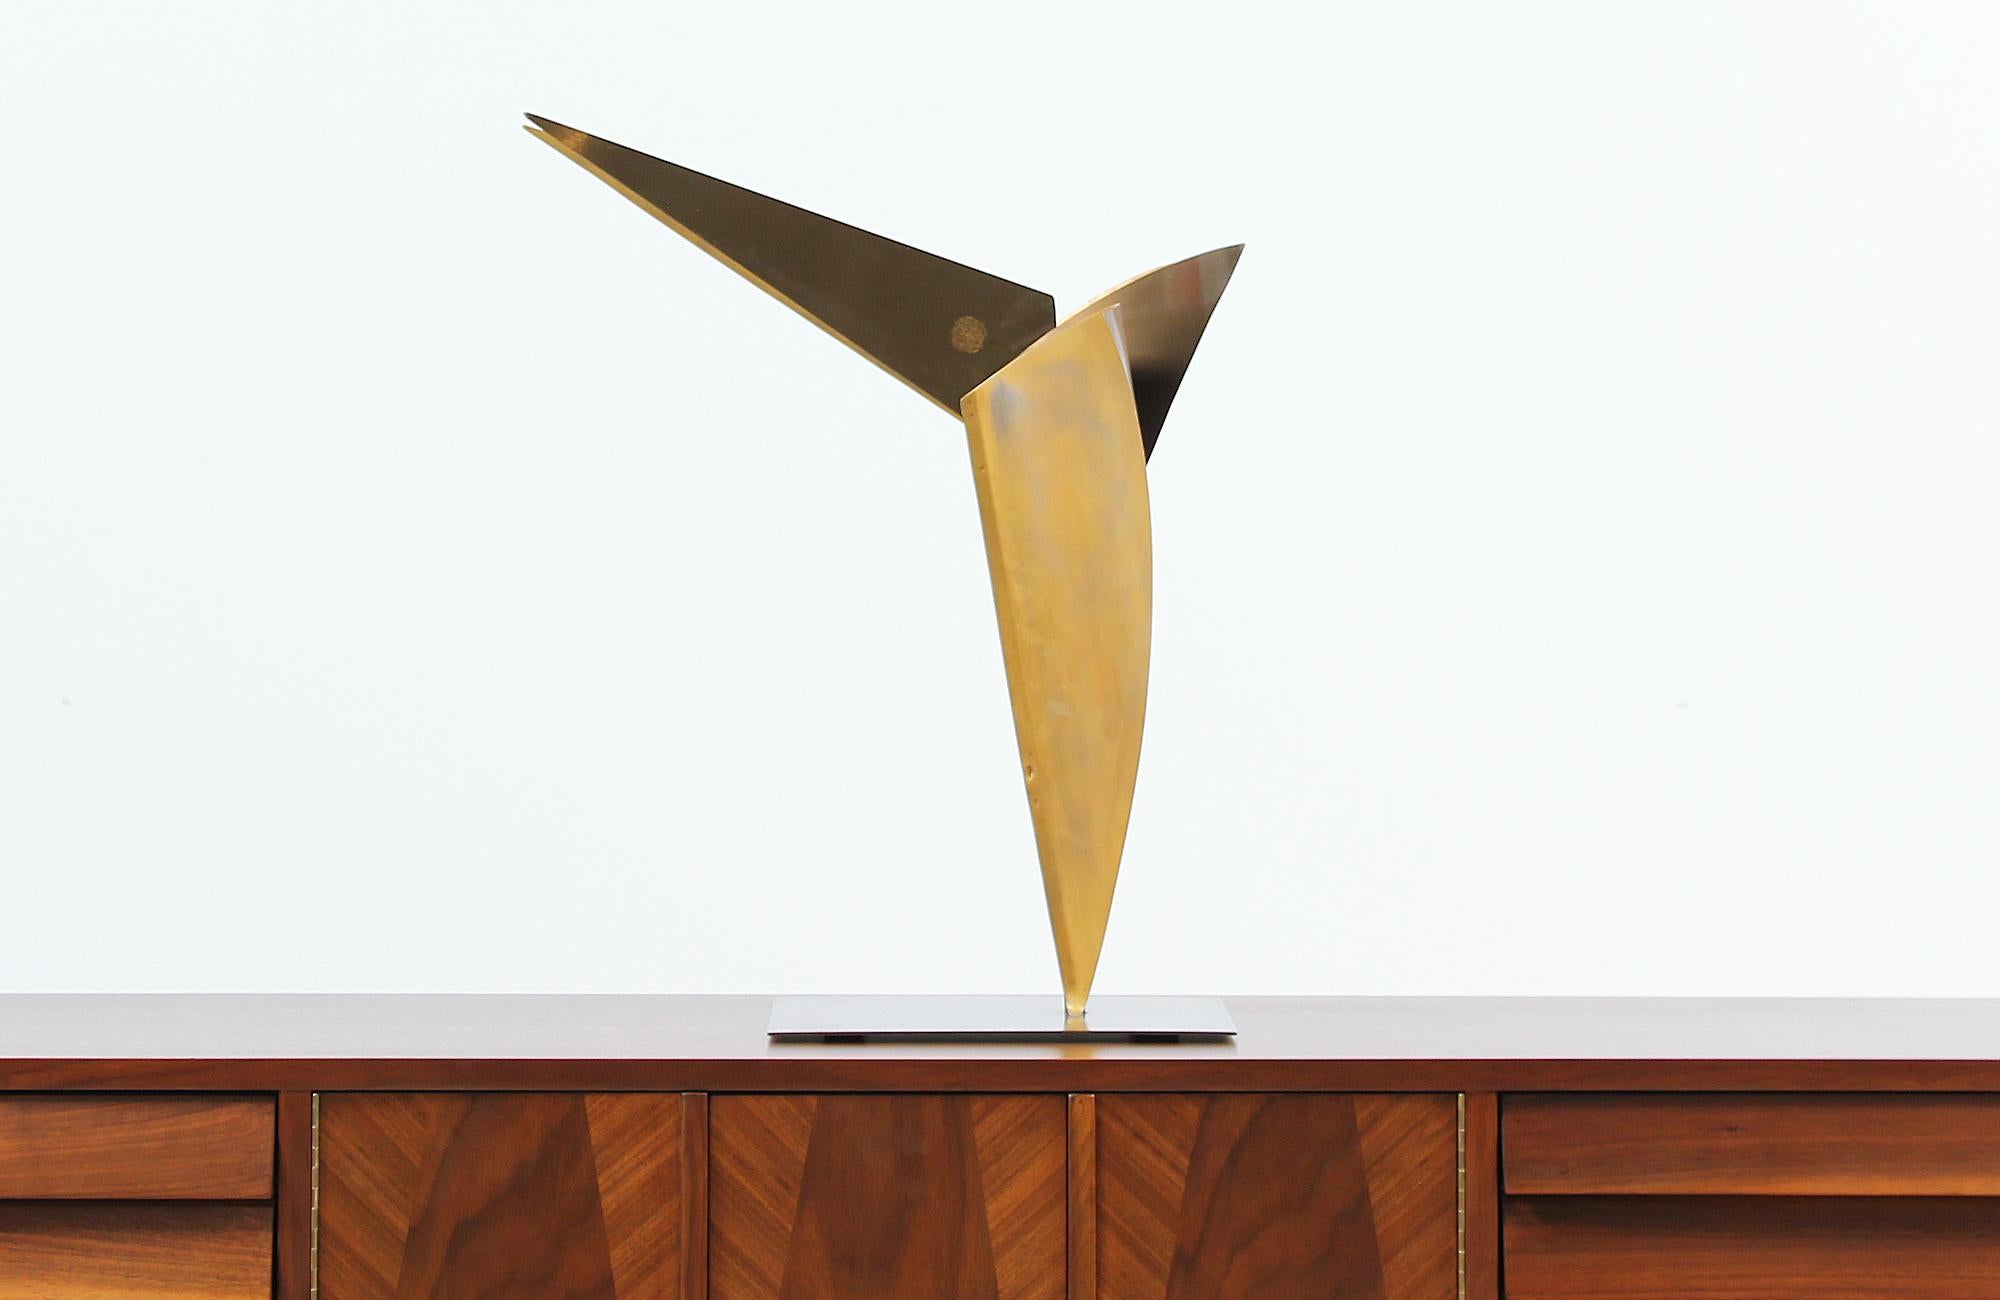 Beautiful cubist sculpture designed and manufactured in the United States circa 1970s. Featuring a quality crafted brass cubist bird with a mix of geometric shapes and textures creating an elegant and bold vibe. This piece is signed by the artist